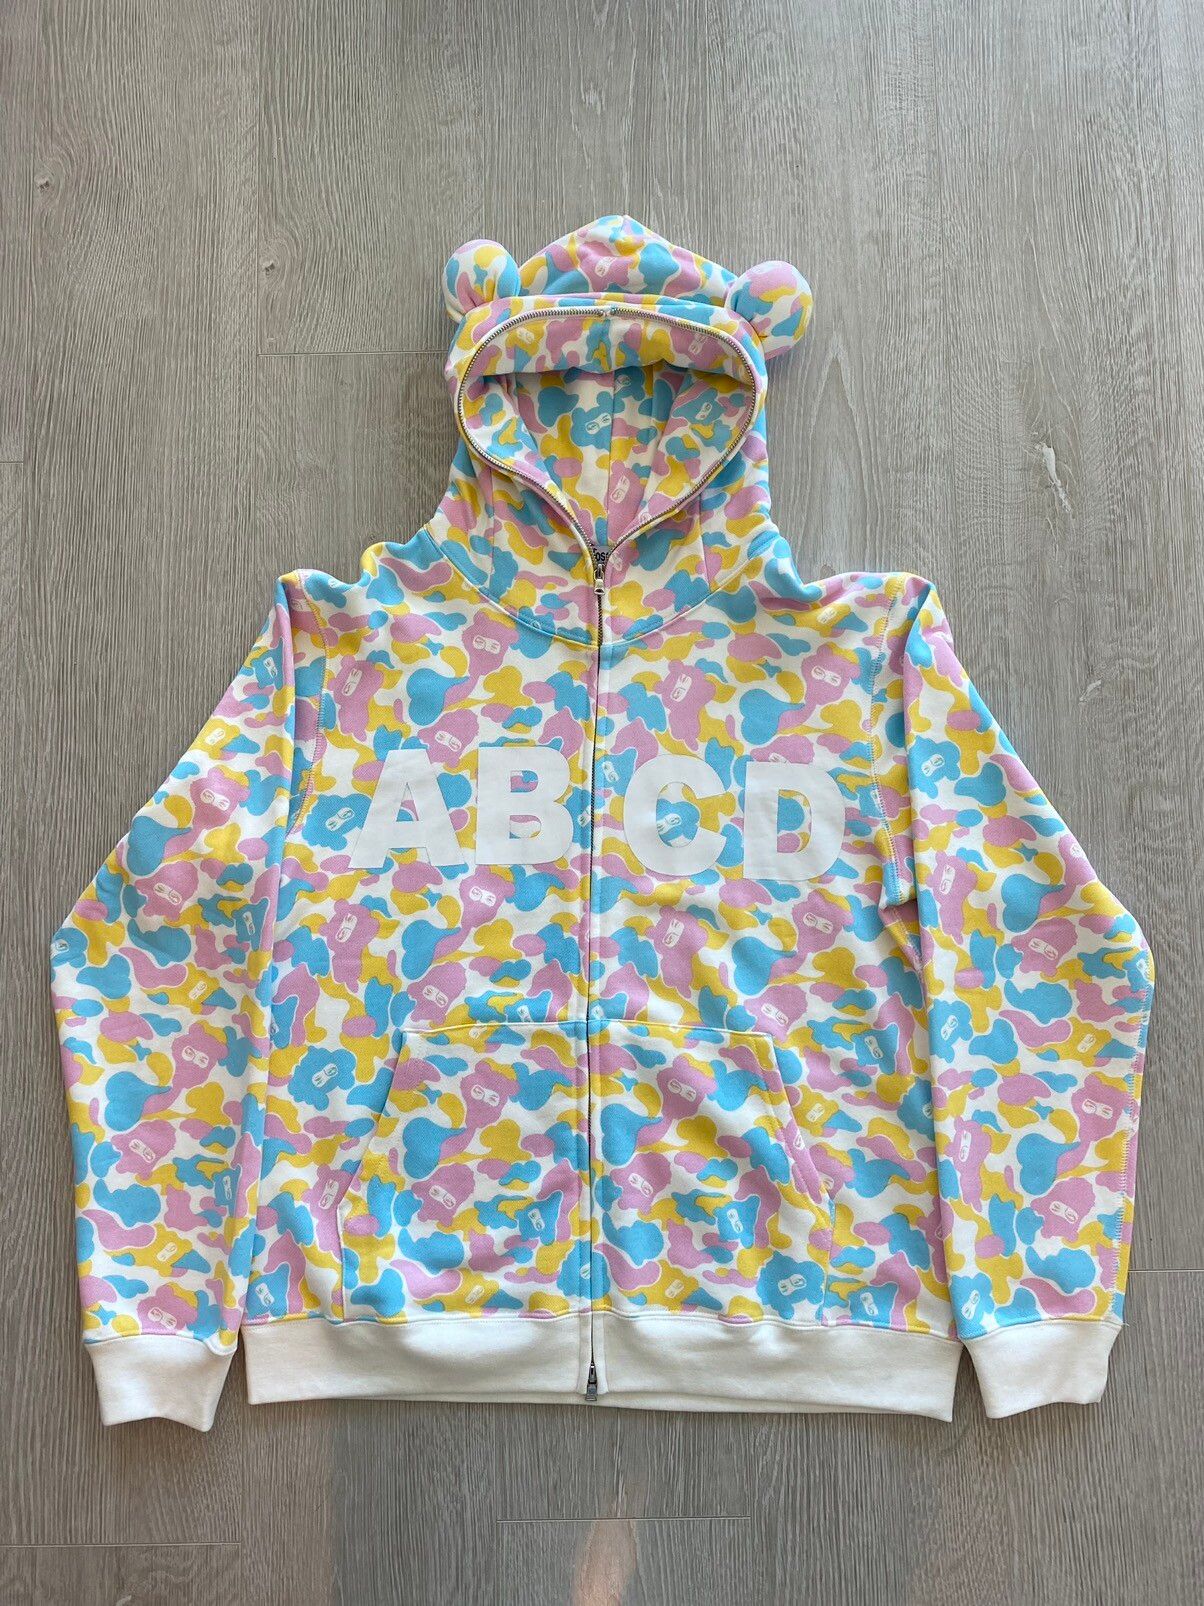 Japanese Brand JOSE WONG ABCD 2.0 NUBIAN JP EXCLUSIVE CANDY ZIP-UP HOODIE |  Grailed